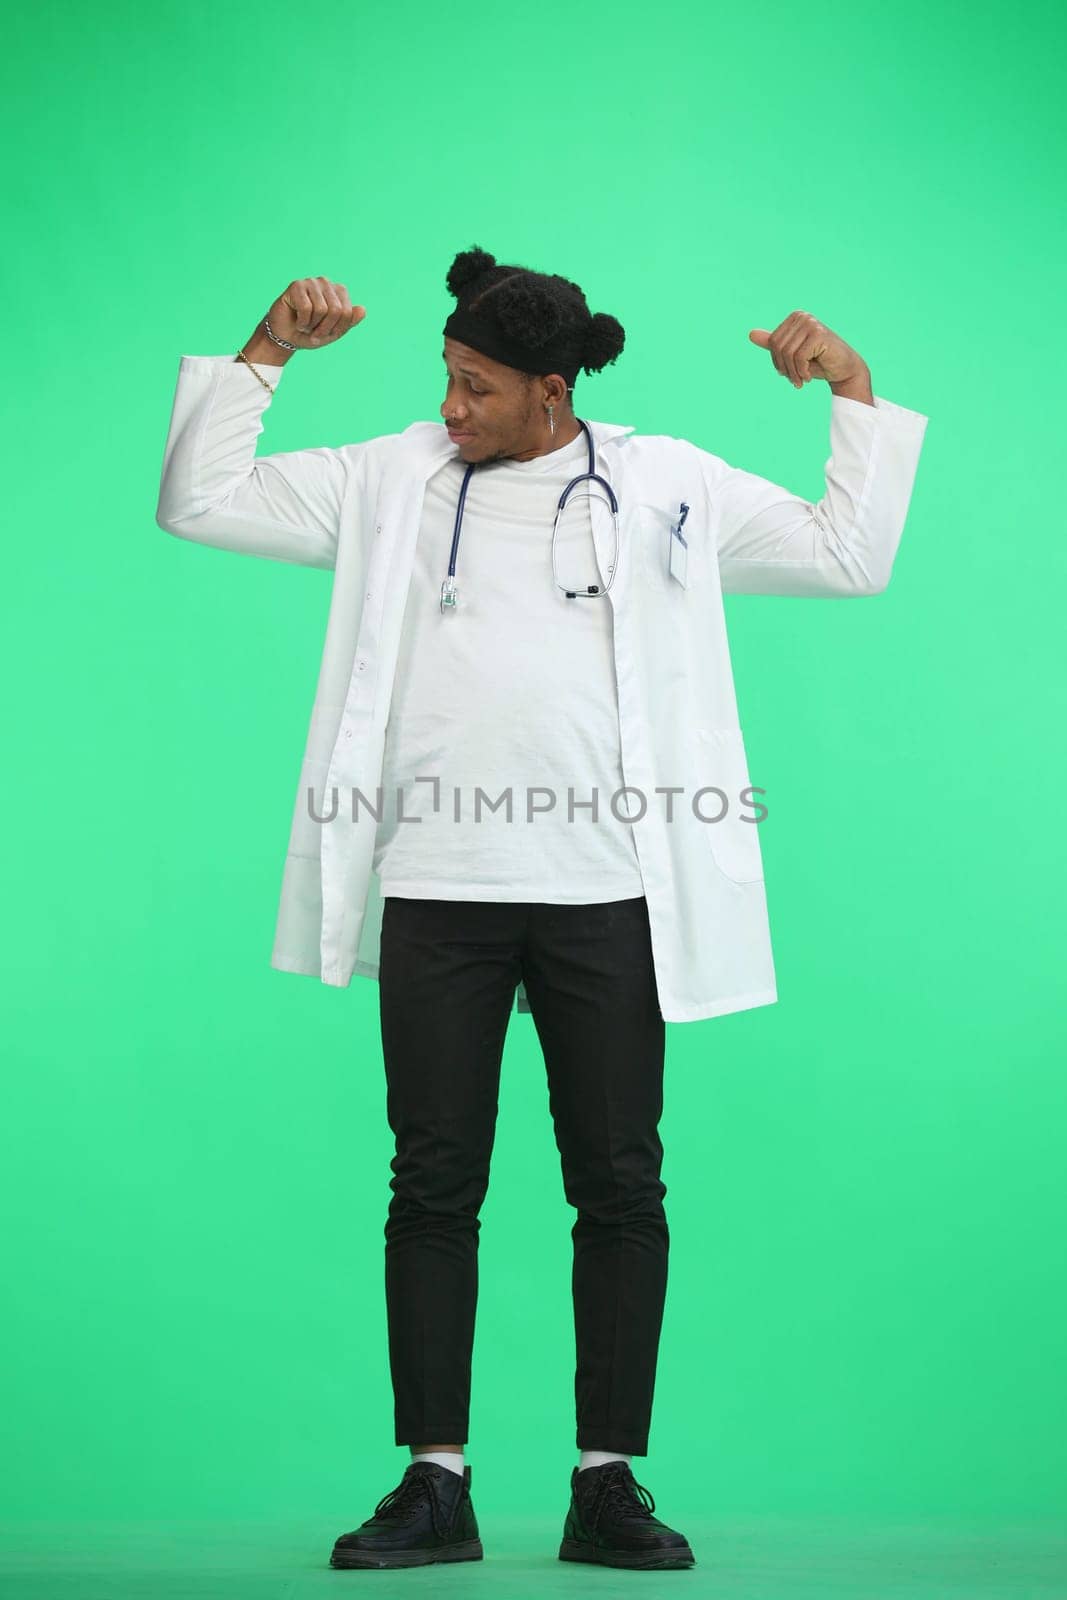 The doctor, in full height, on a green background, shows strength.